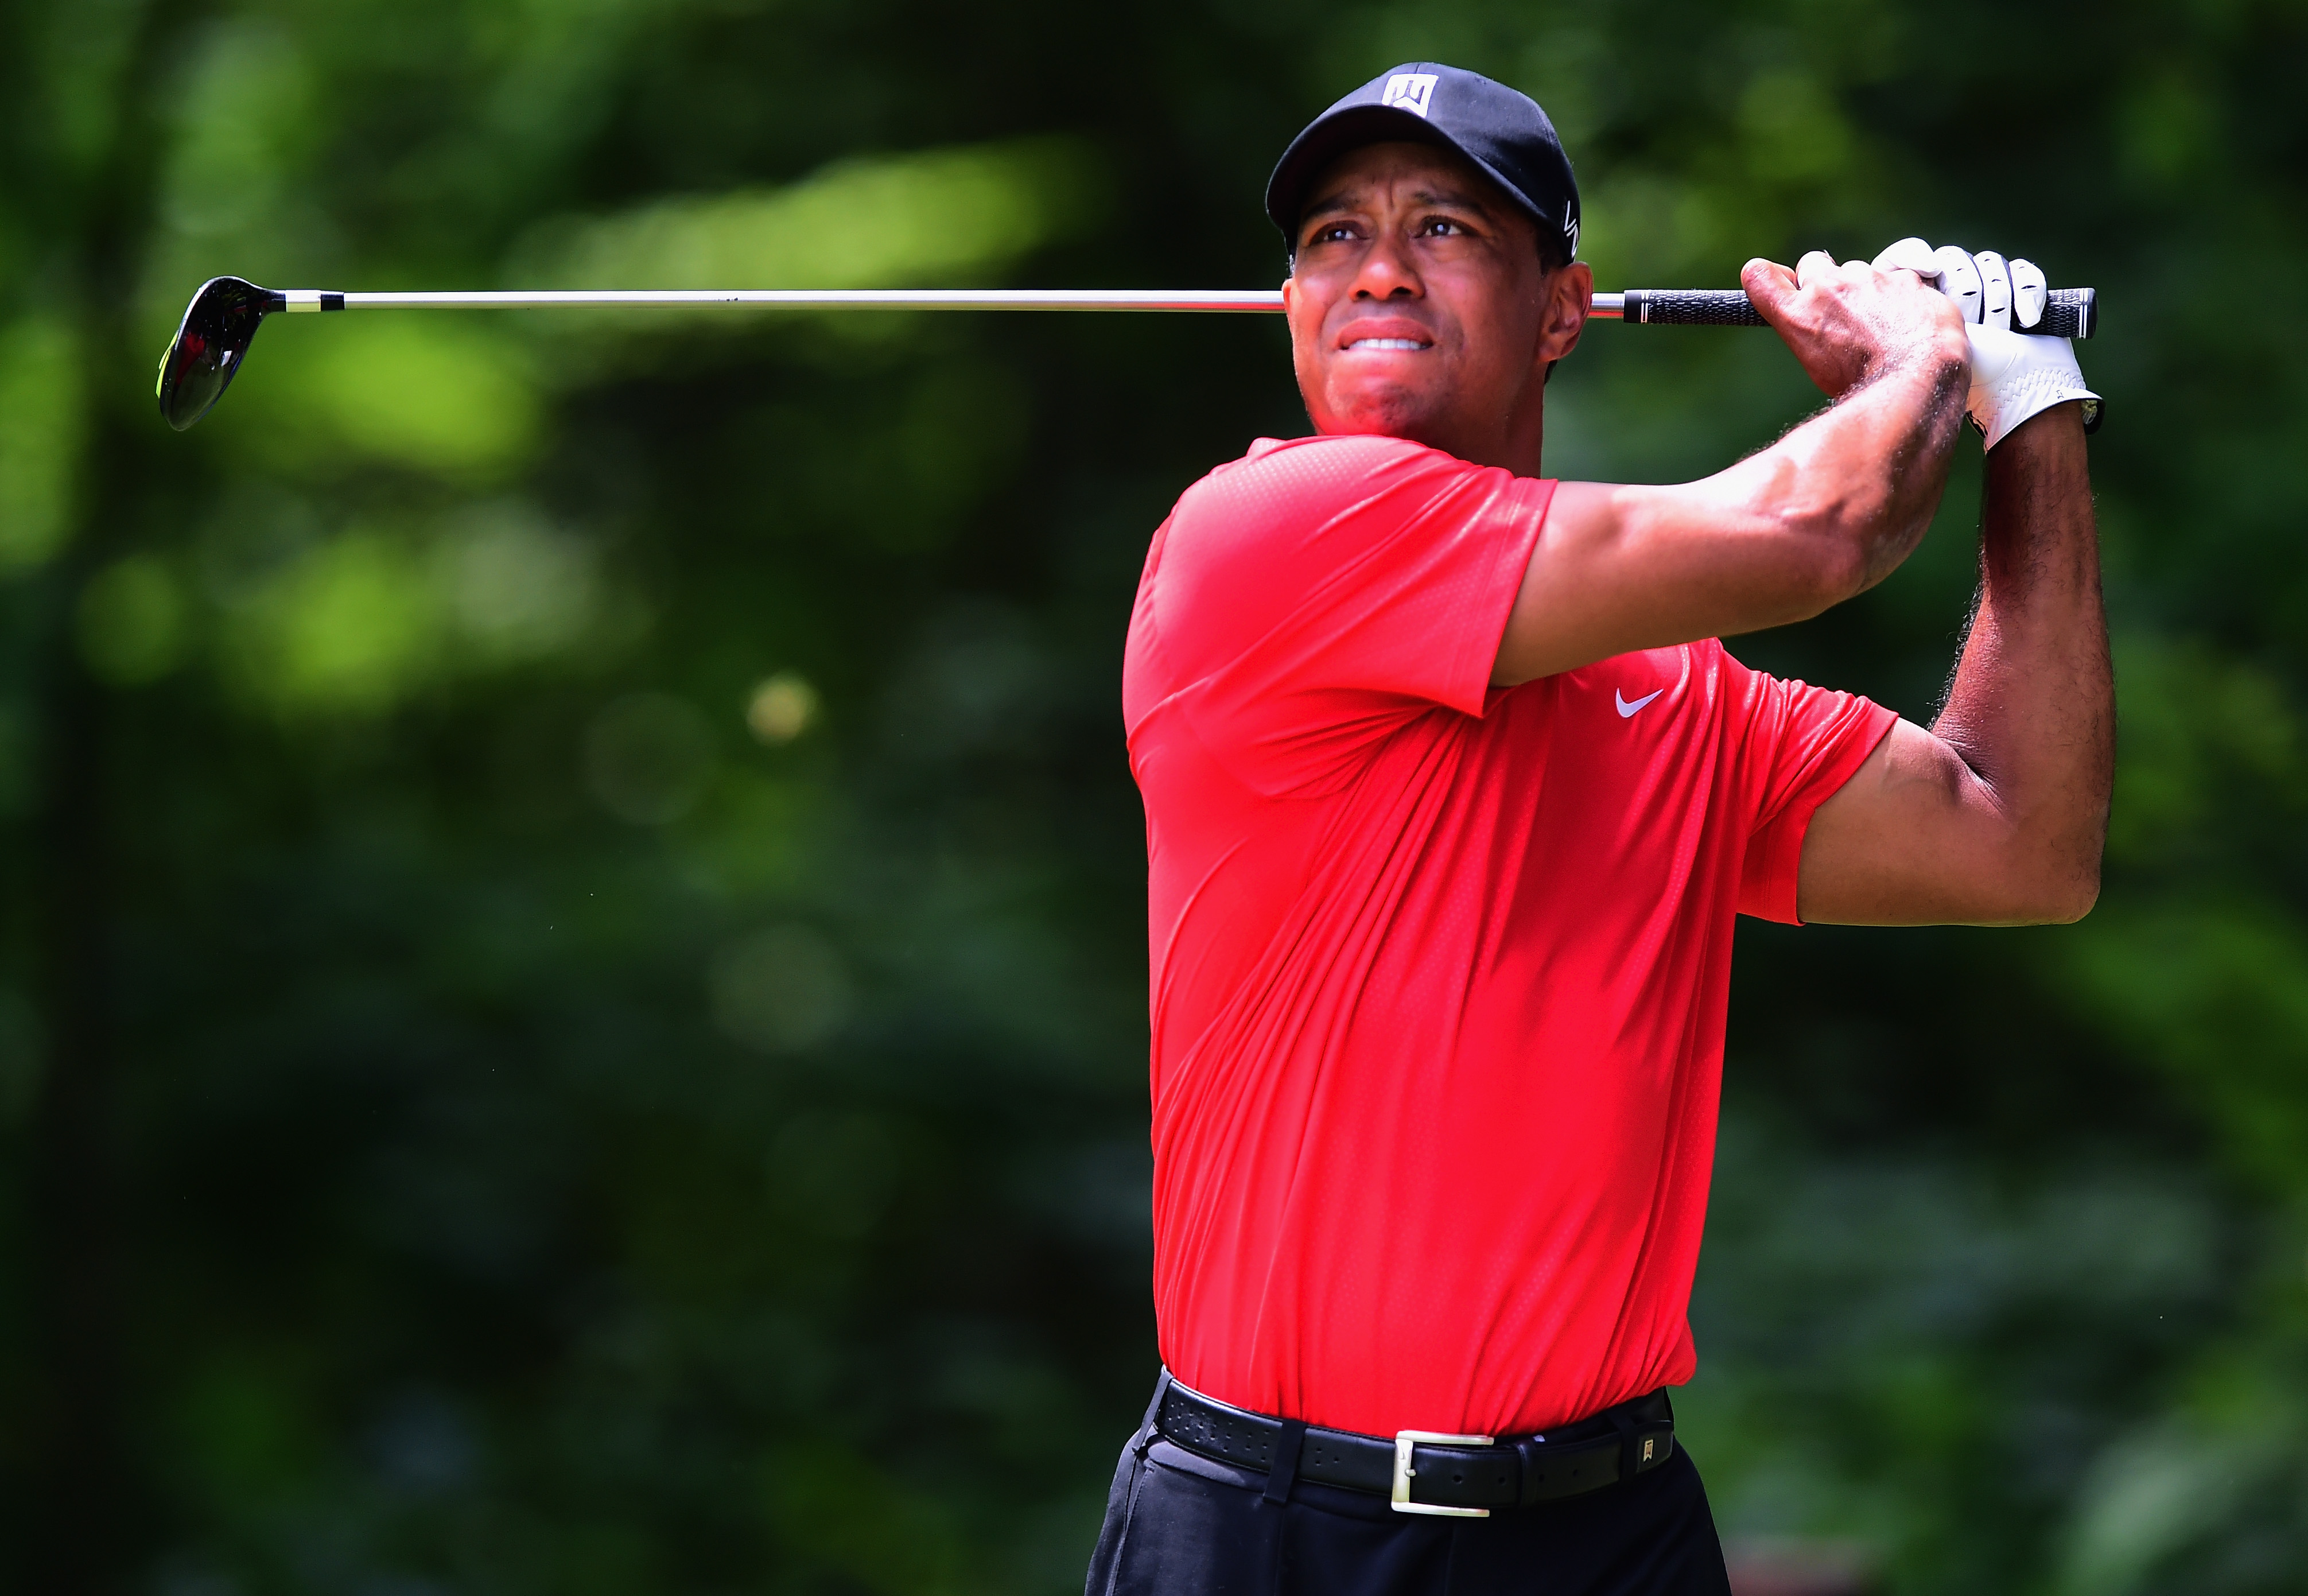 GREENSBORO, NC - AUGUST 23: Tiger Woods tees off on the second hole during the final round of the Wyndham Championship at Sedgefield Country Club on August 23, 2015 in Greensboro, North Carolina.   Jared C. Tilton/Getty Images/AFP